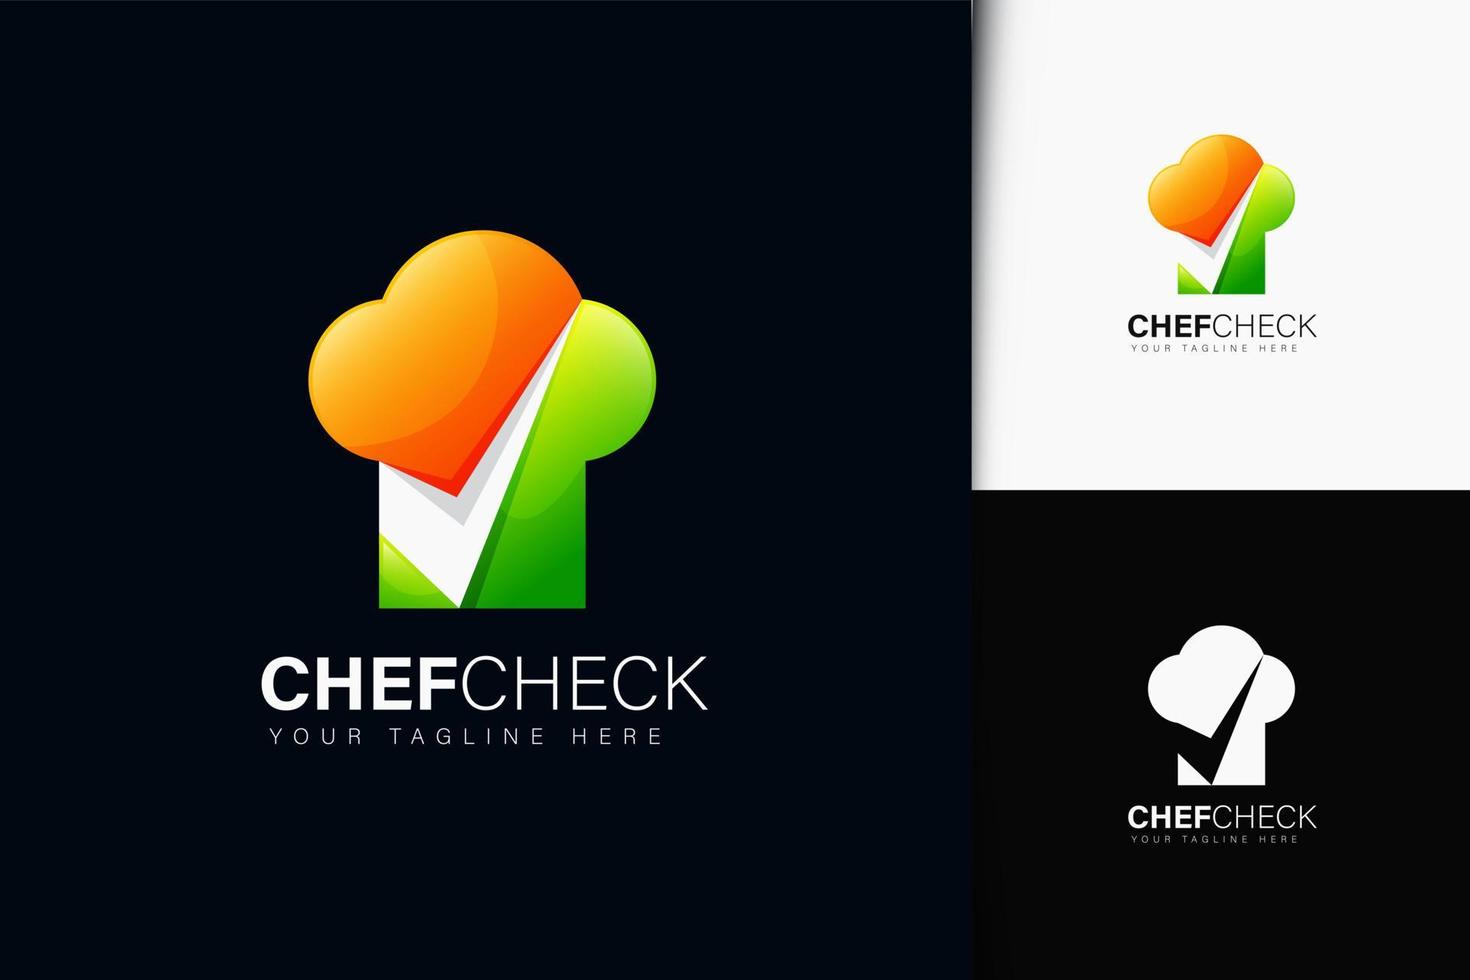 Chef check logo design with gradient vector